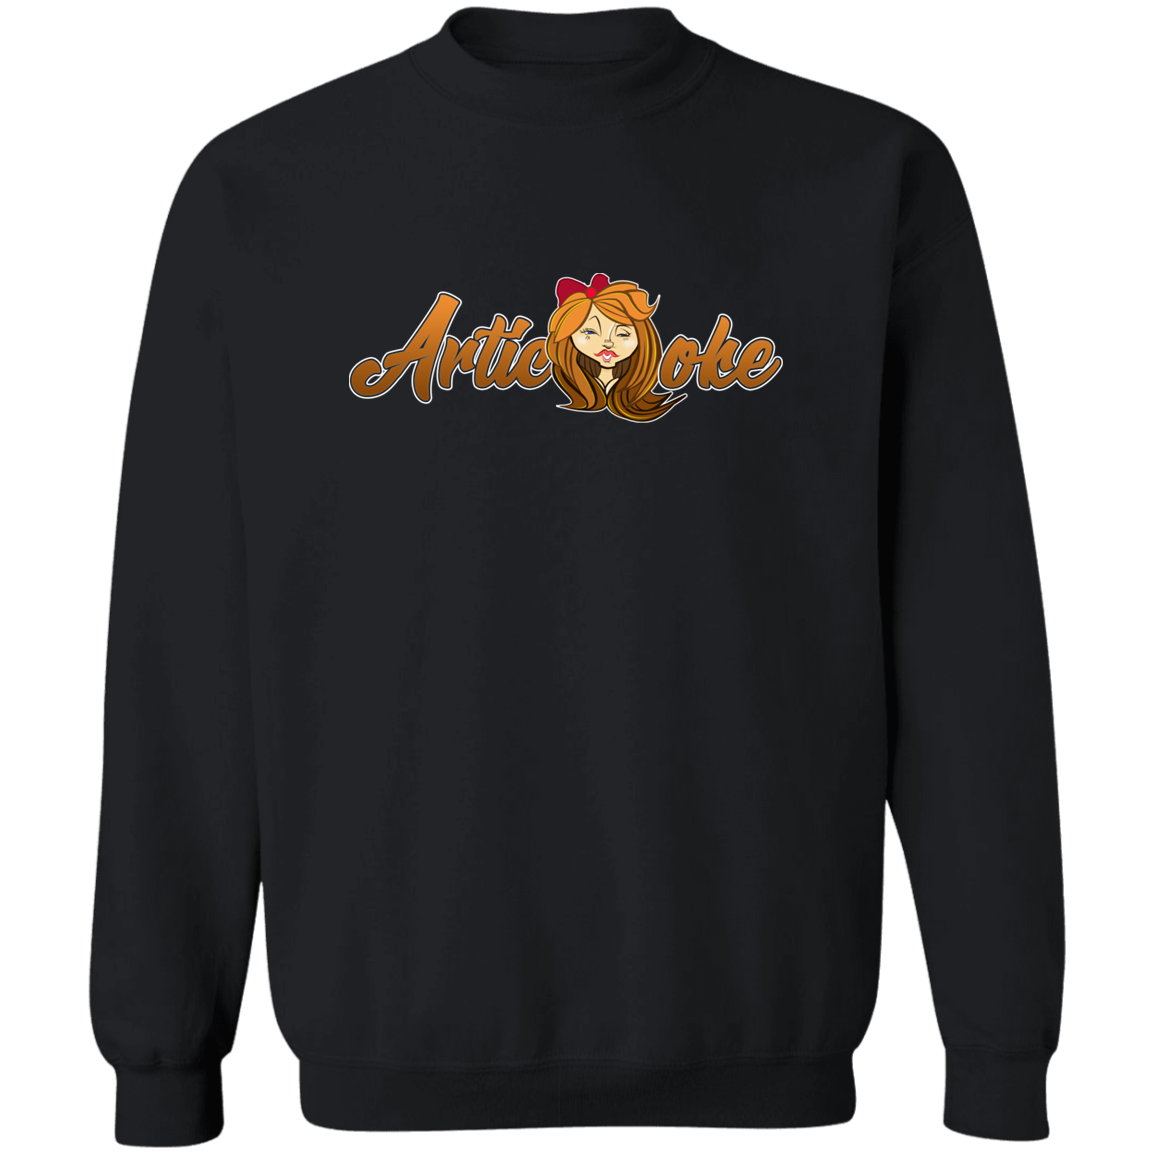 ZZ#21 Characters and Fonts. Aubrey. A show case of my characters and font styles. Crewneck Pullover Sweatshirt